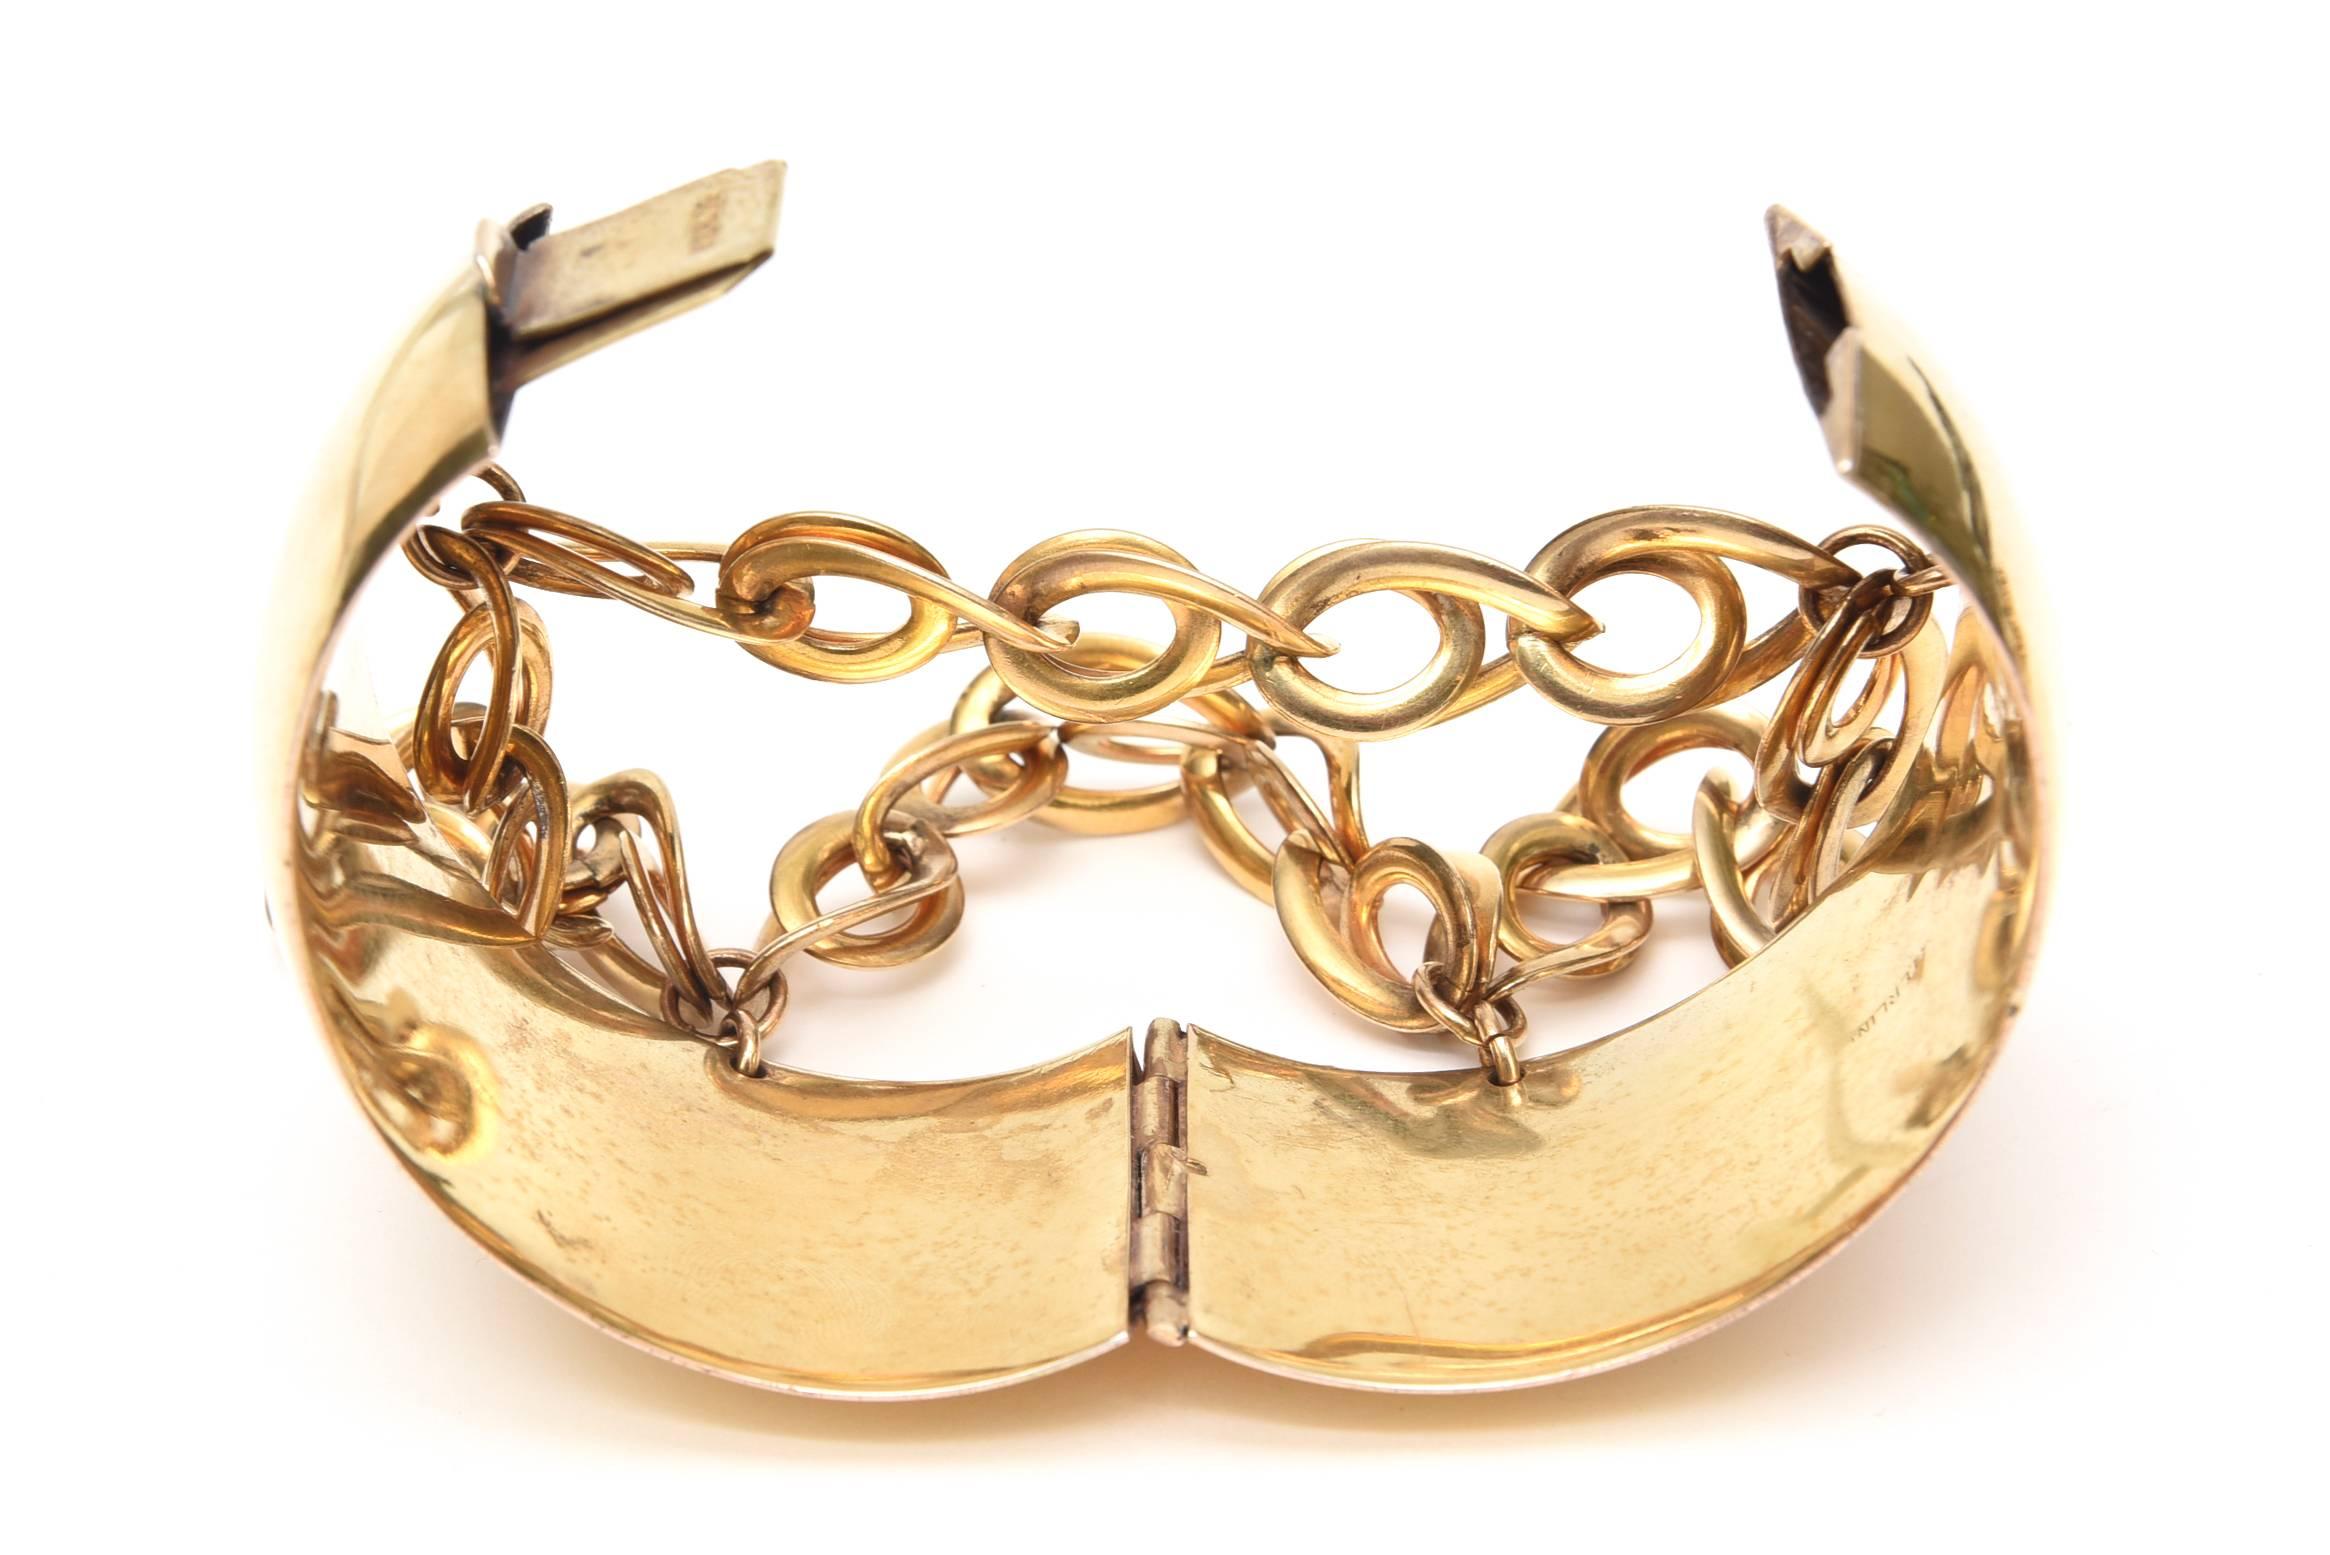 Gold Wash over Sterling Silver Cuff Bracelet with Dangling Link Chain /SALE 3